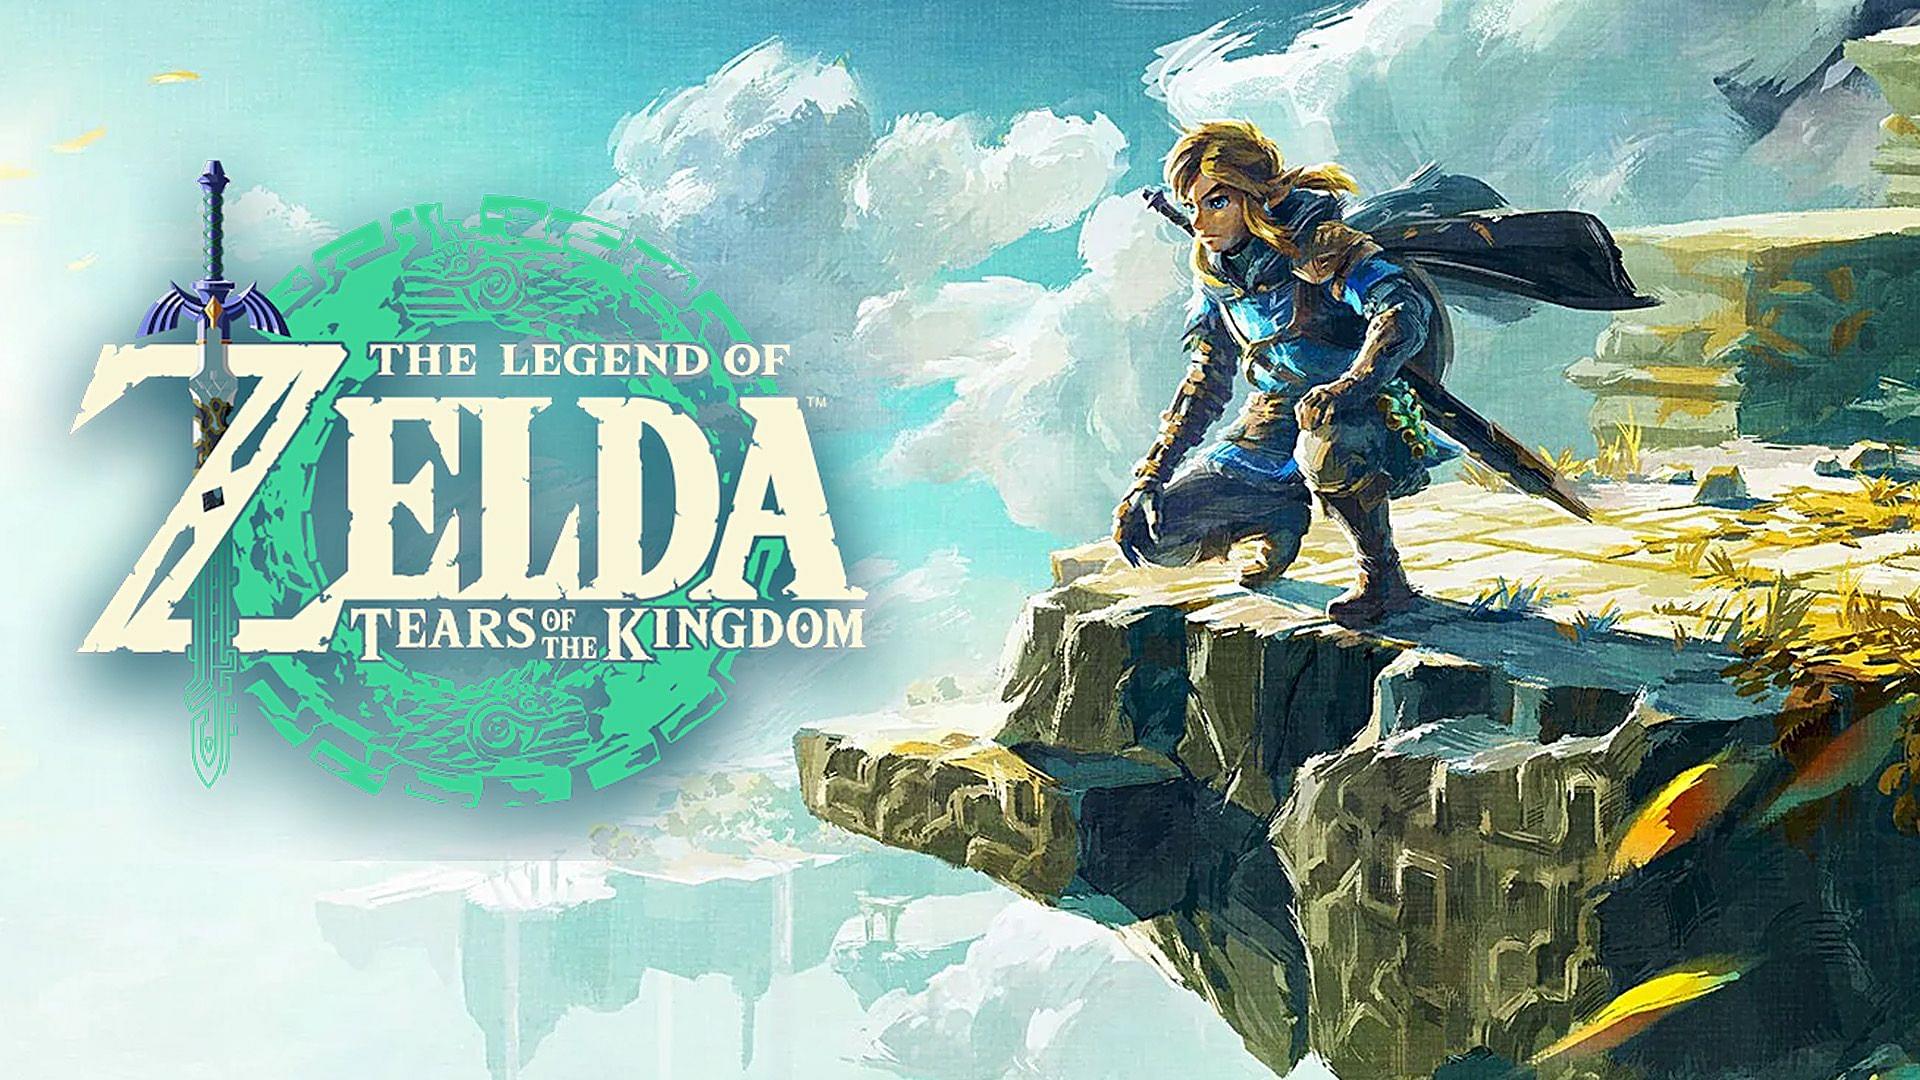 The official cover art of The Legend of Zelda: Tears of the Kingdom